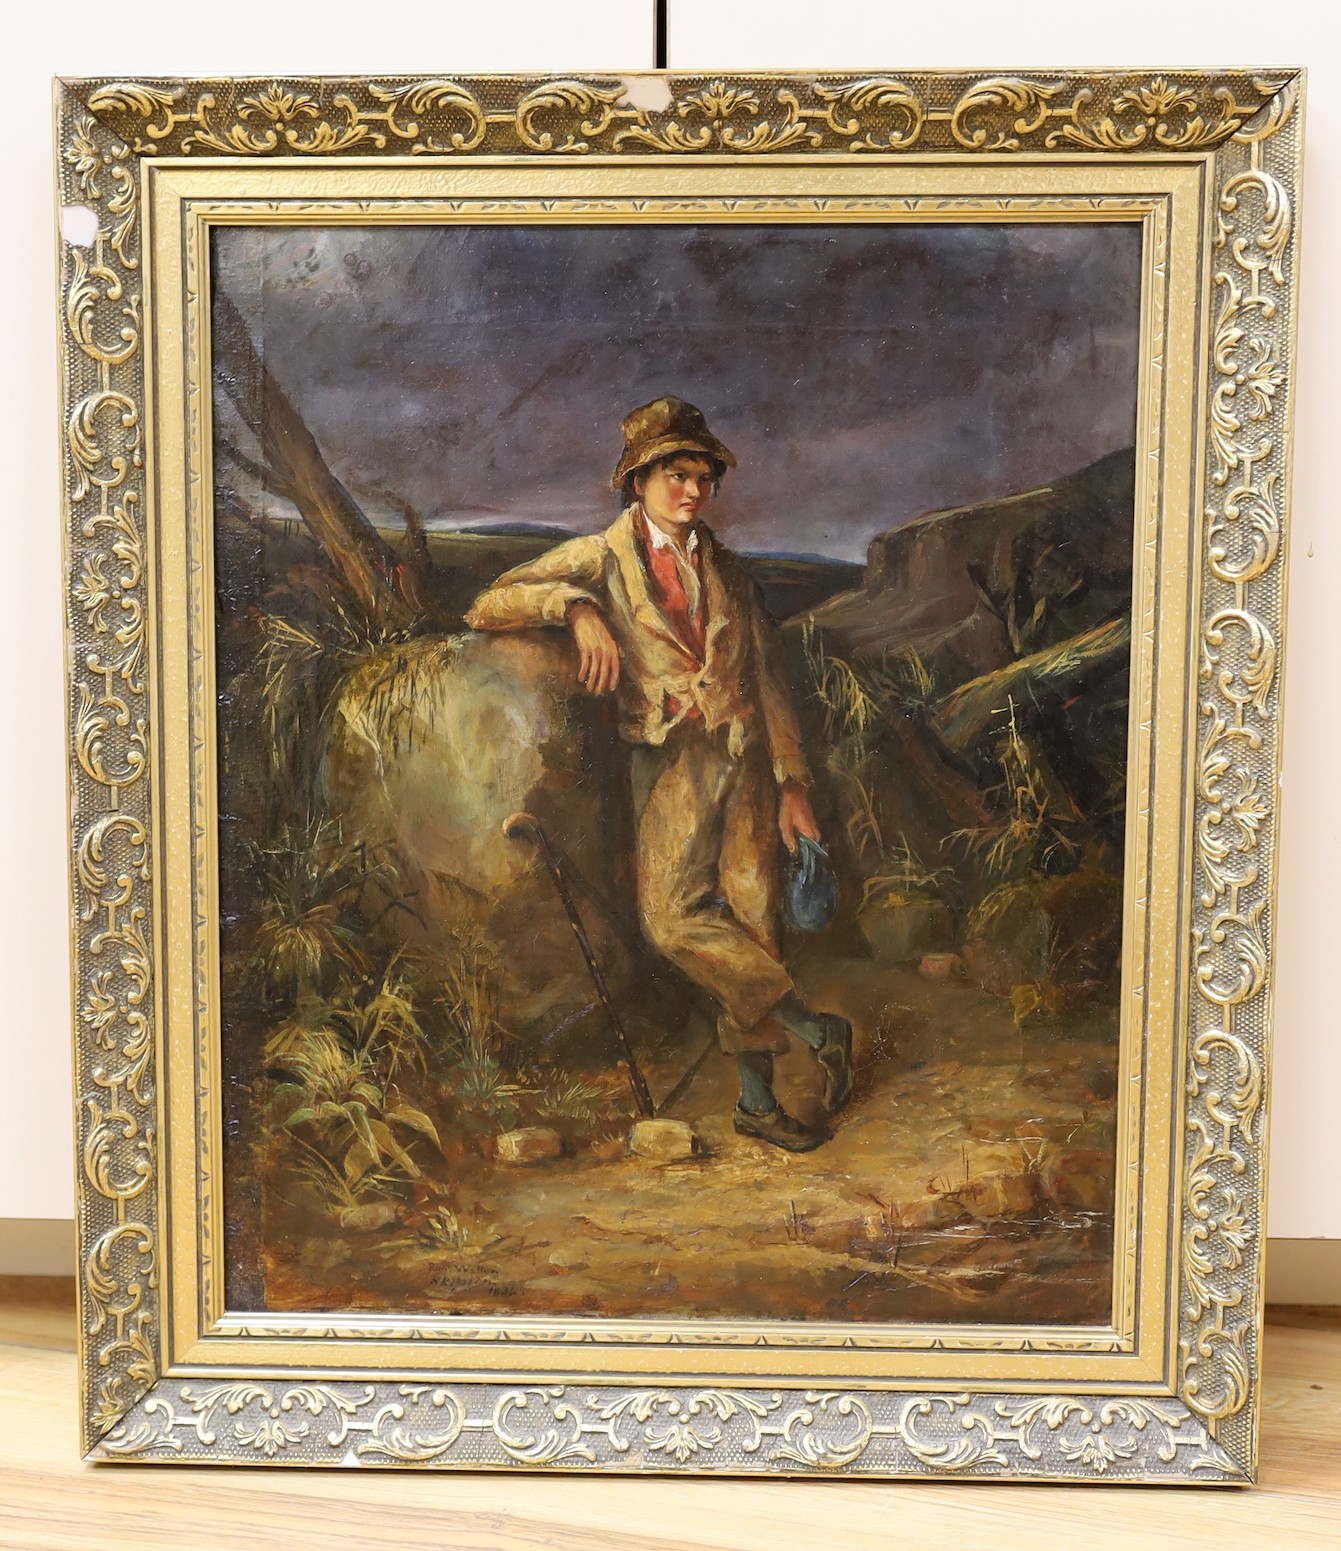 Richard Waller (1811-1882), oil on canvas, boy in landscape, inscribed Skipton, signed and dated 1834, 42 x 34cm